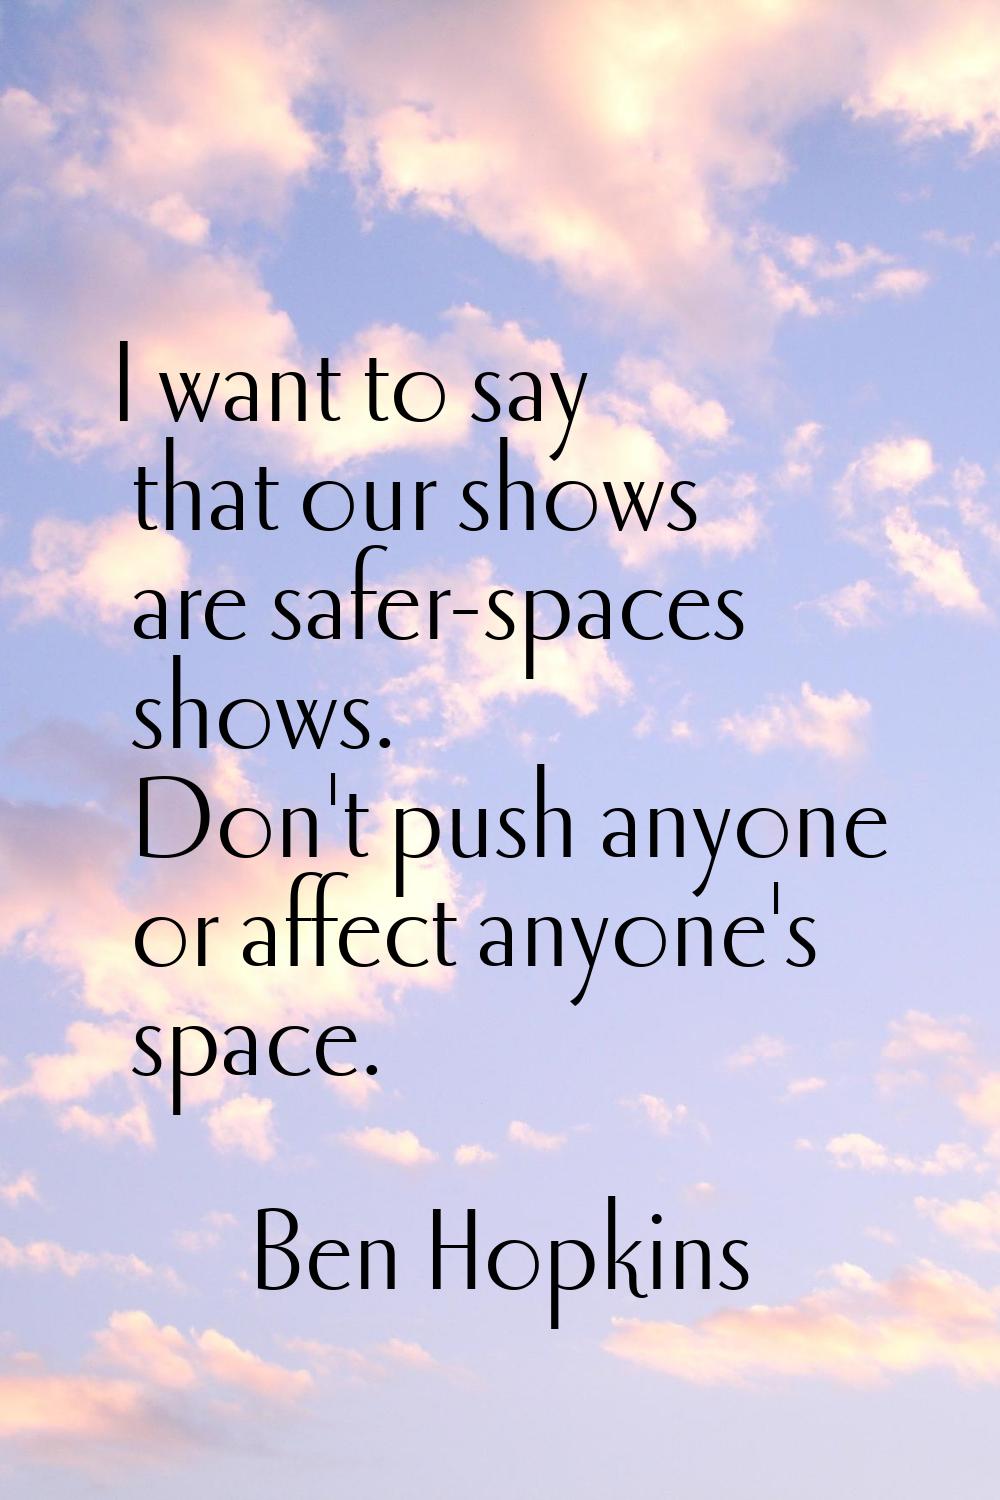 I want to say that our shows are safer-spaces shows. Don't push anyone or affect anyone's space.